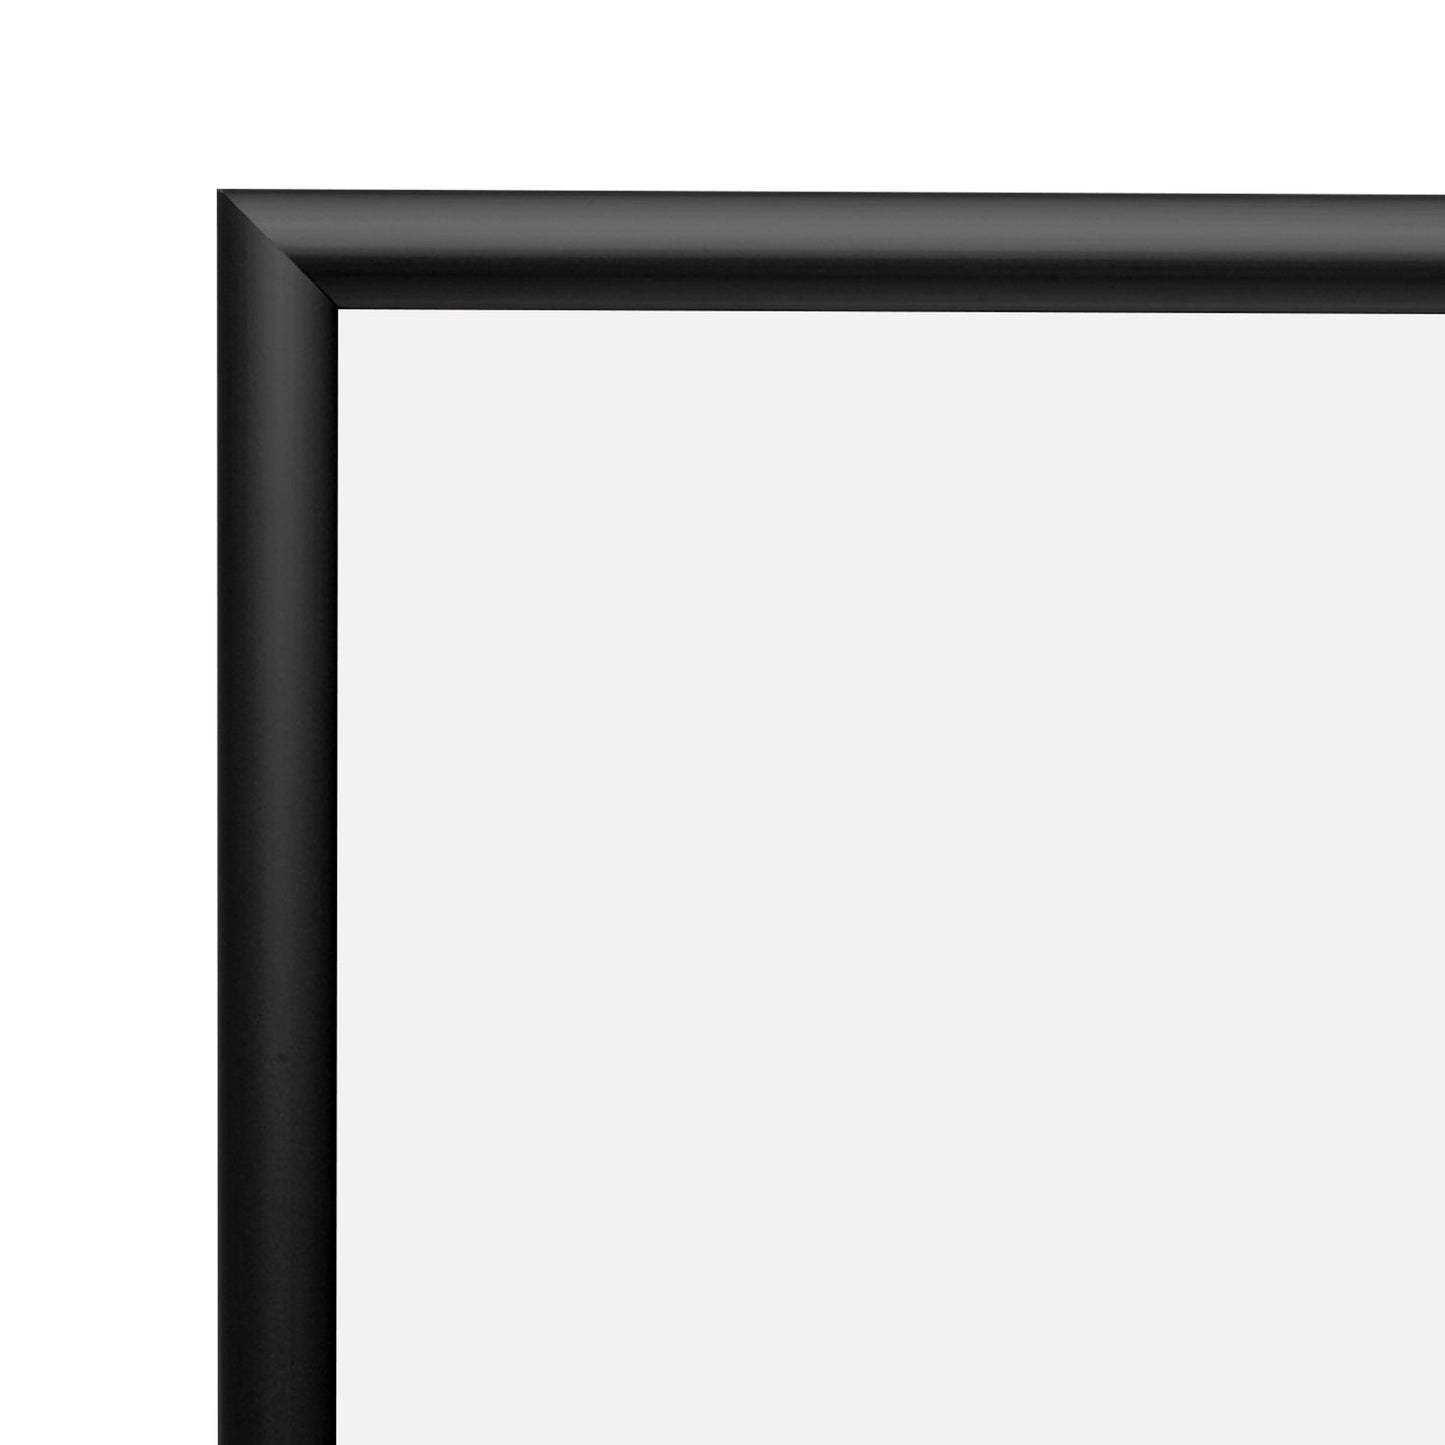 Load image into Gallery viewer, 20x24 Black SnapeZo® Snap Frame - 1&amp;quot; Profile
